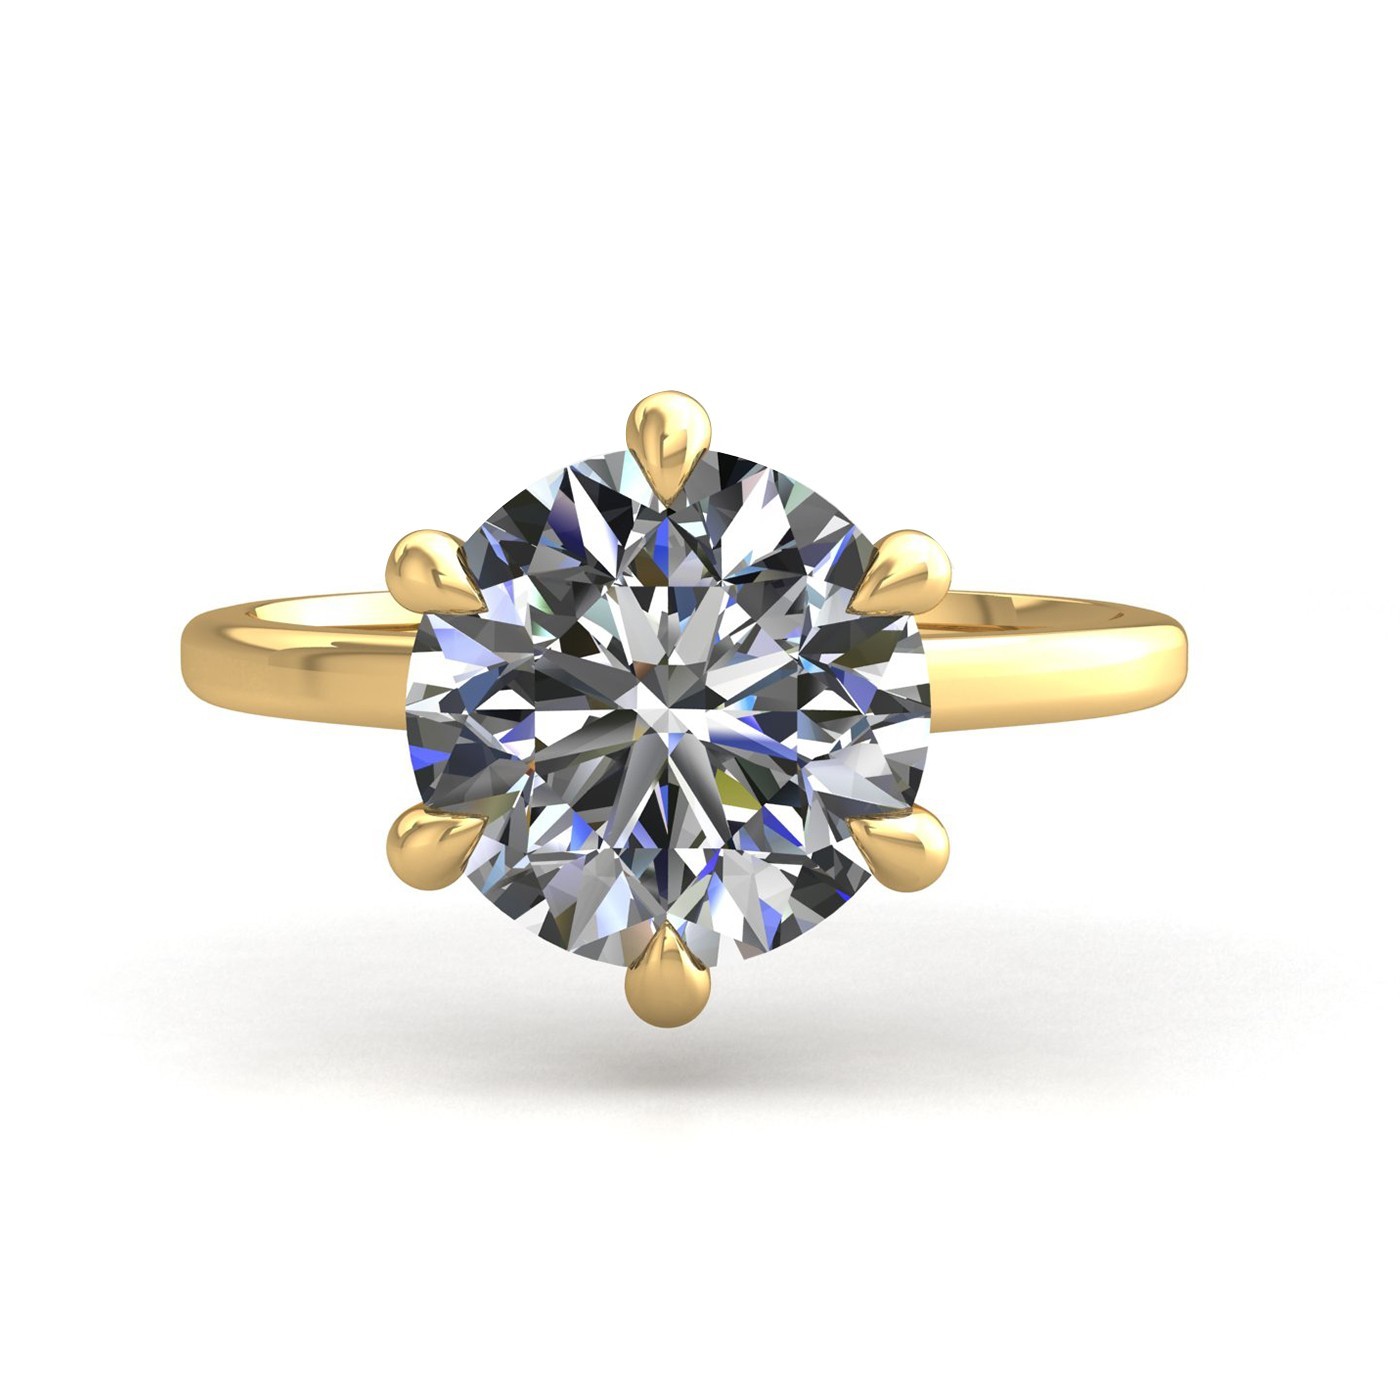 18k yellow gold 0,30 ct 6 prongs solitaire round cut diamond engagement ring with whisper thin band Photos & images